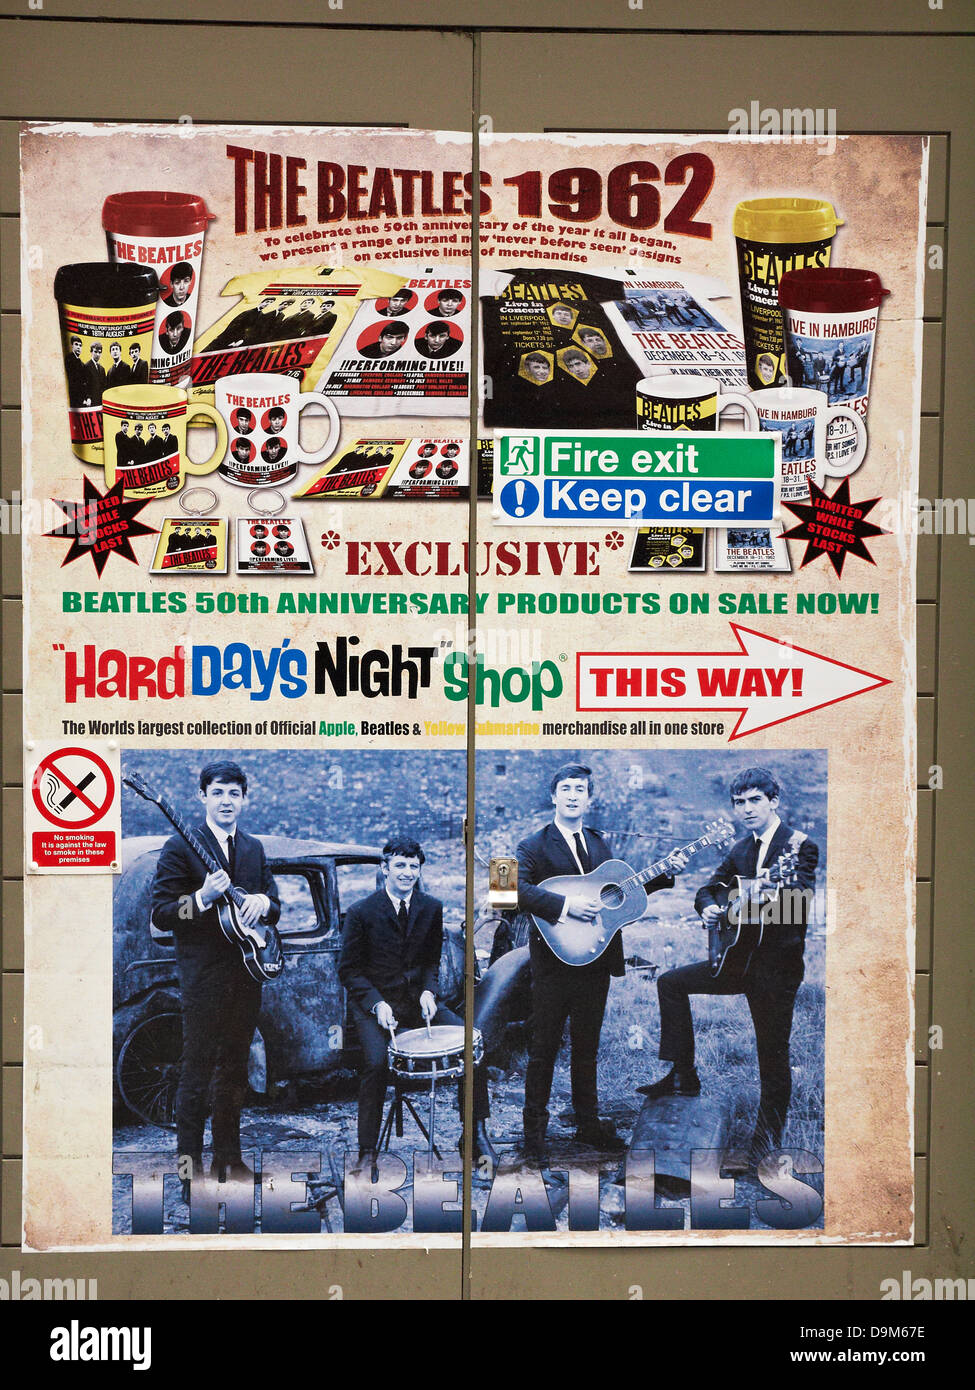 Beatles poster from Hard Days Night Shop in Liverpool UK Stock Photo